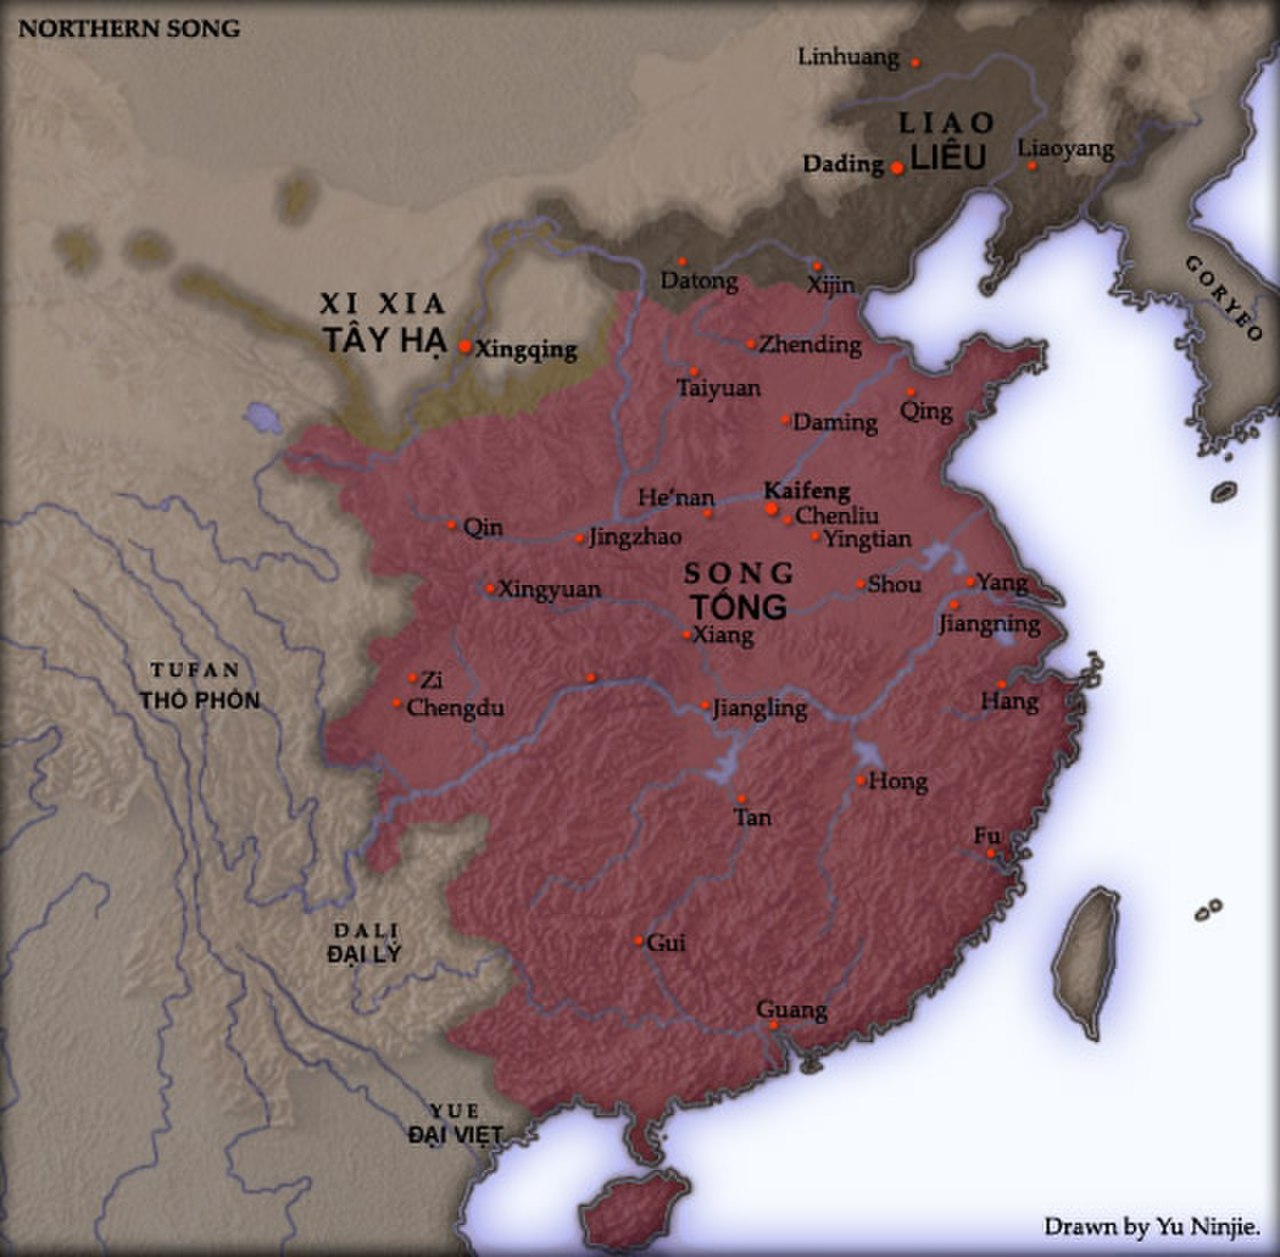 A map showing the territory of the Song, Liao, and Xia dynasties. The Song dynasty occupies the east half of what constitutes the territory of the modern People's Republic of China, except for the northernmost areas (modern Inner Mongolia province and above). The Xia occupy a small strip of land surrounding a river in what is now Inner Mongolia, and the Liao occupy a large section of what is today northeast China.